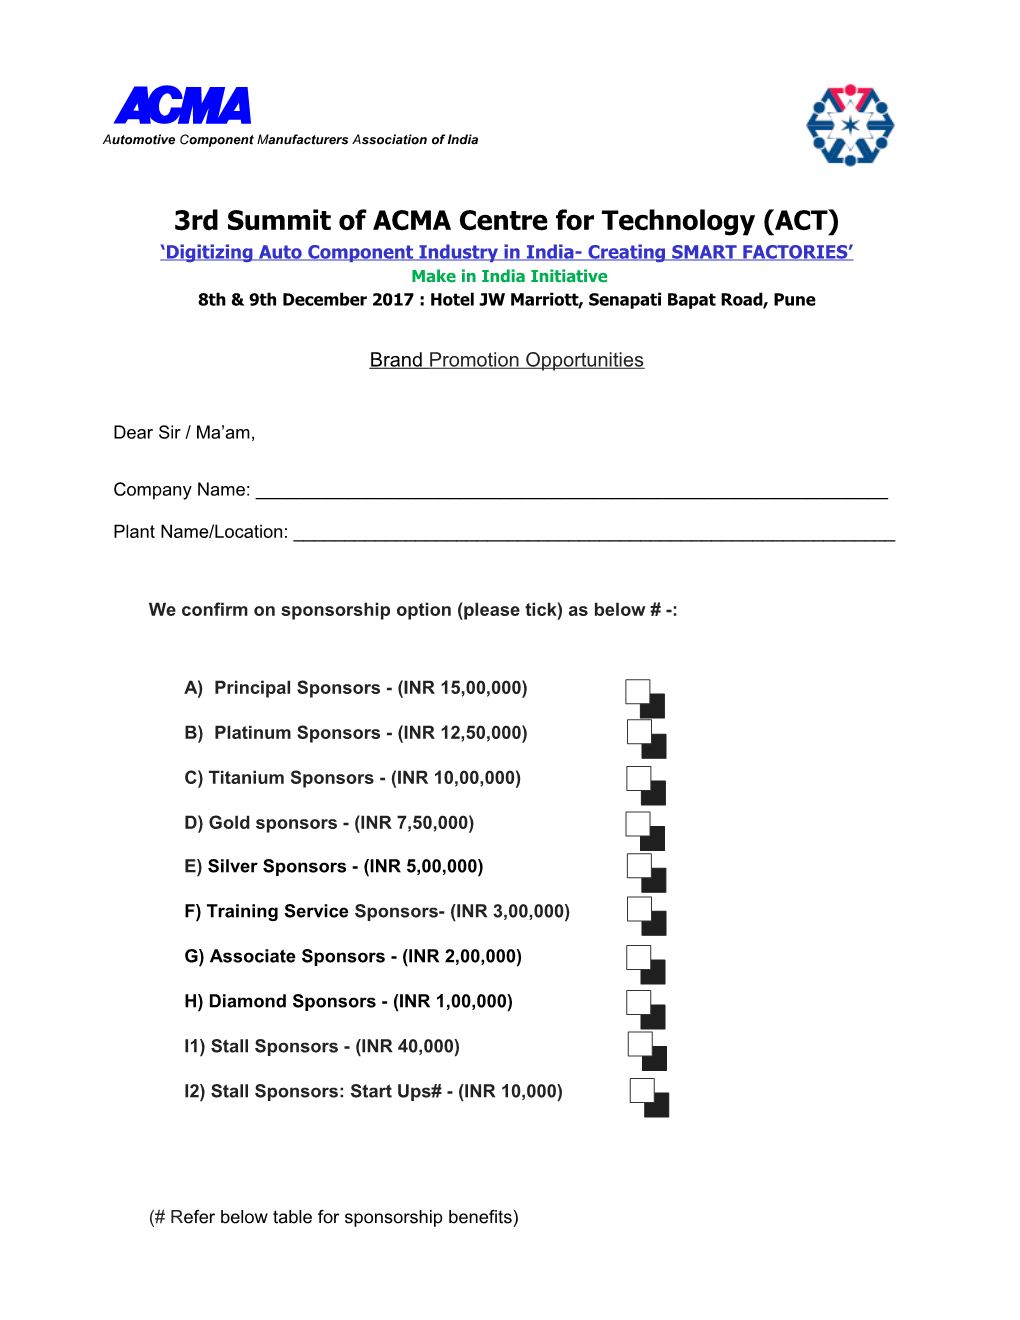 3Rd Summit of ACMA Centre for Technology (ACT)